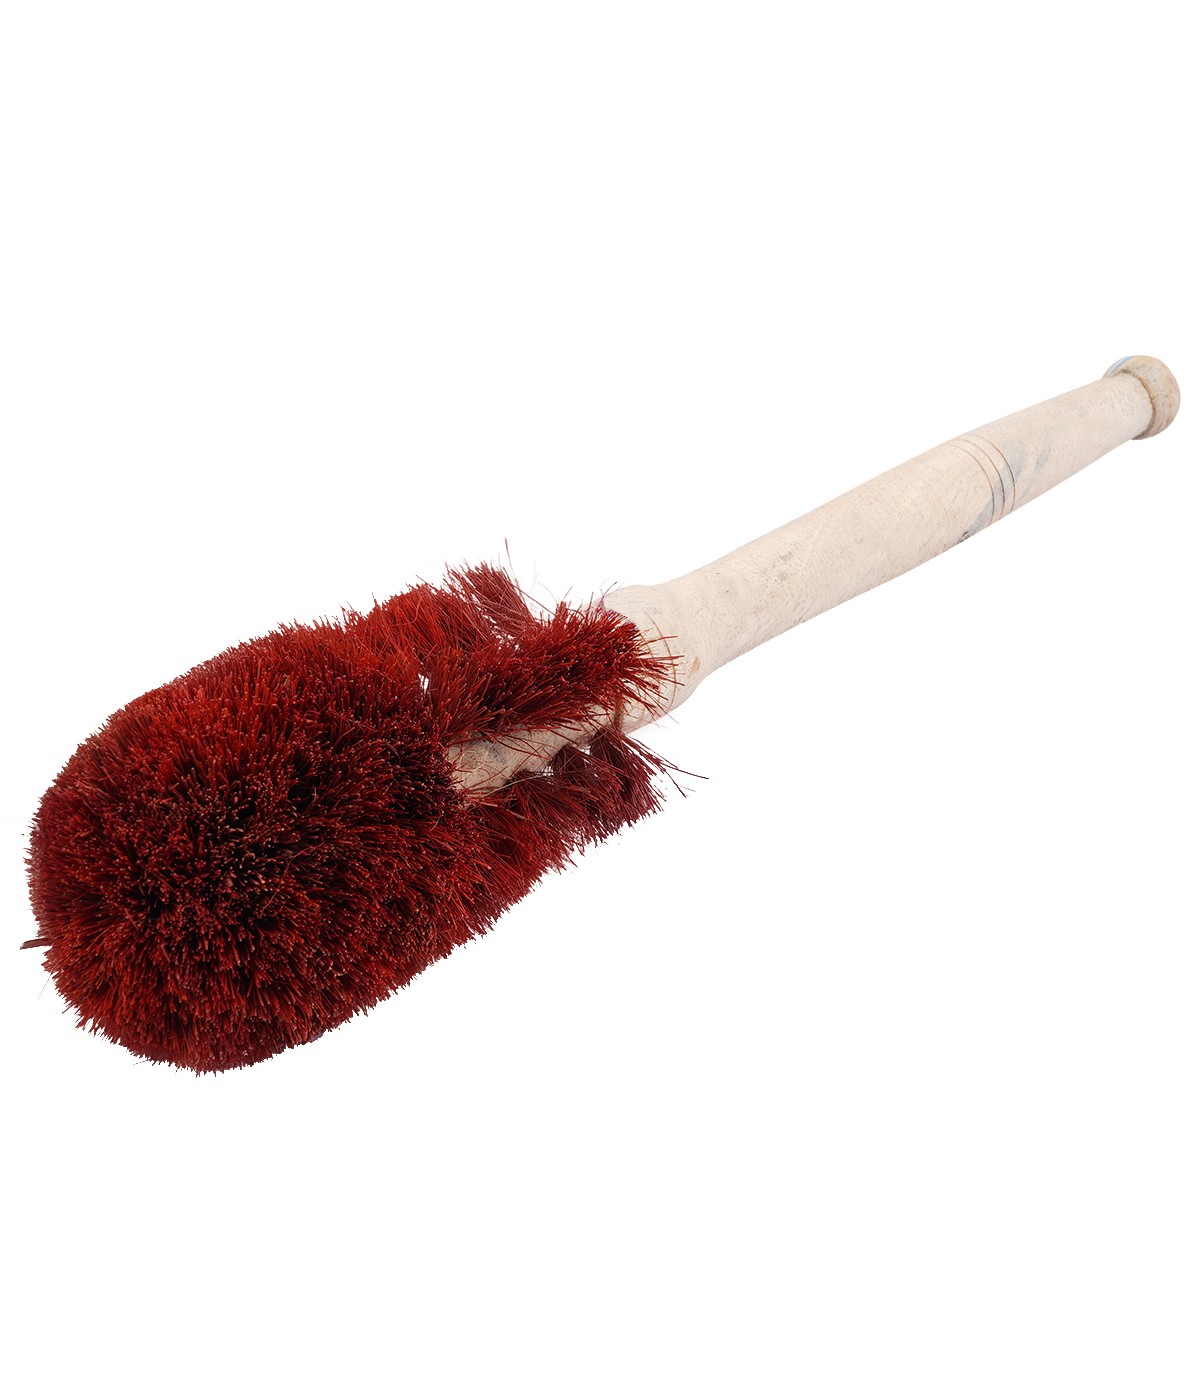 Natural Coir Bristle Toilet Brush - Eco-Friendly Cleaning for a Sparkling Bathroom – 18 inches Red (pack of 1)